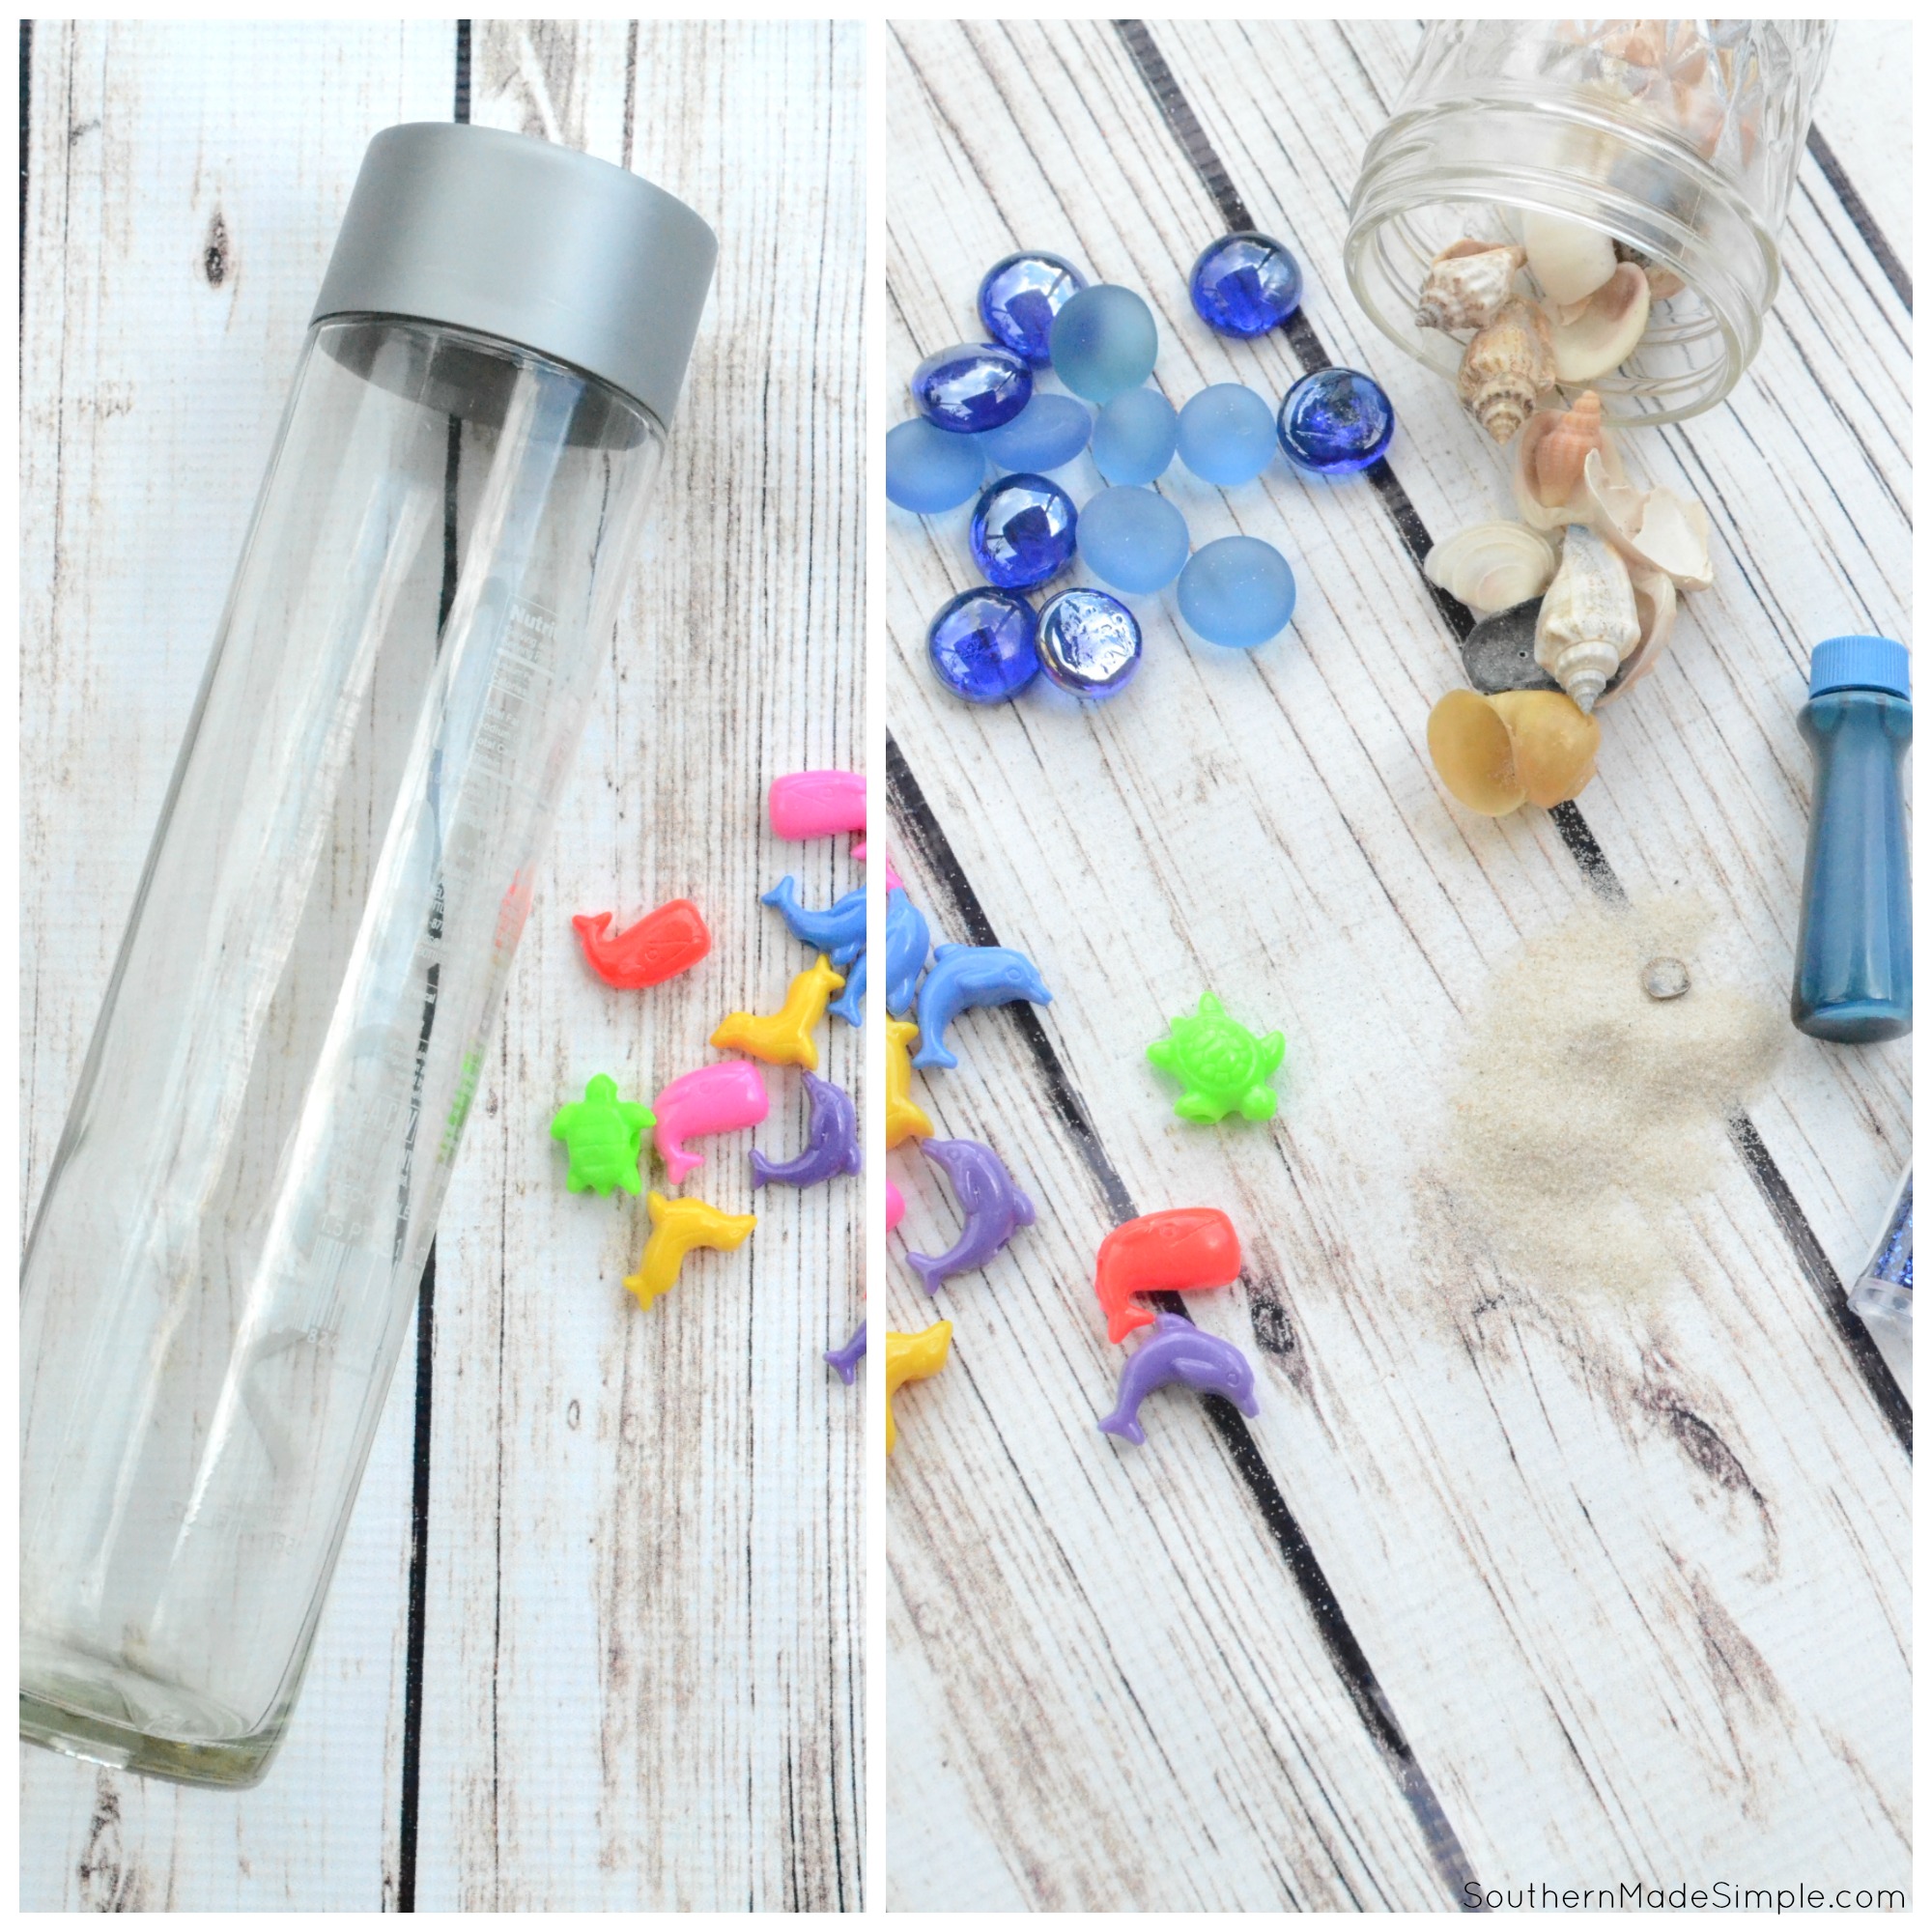 Do you have a toddler in the back seat who hates riding in the car? Take along this easy DIY Ocean Seek and Find Bottle to help keep them entertained!#RoadTripOil #ad